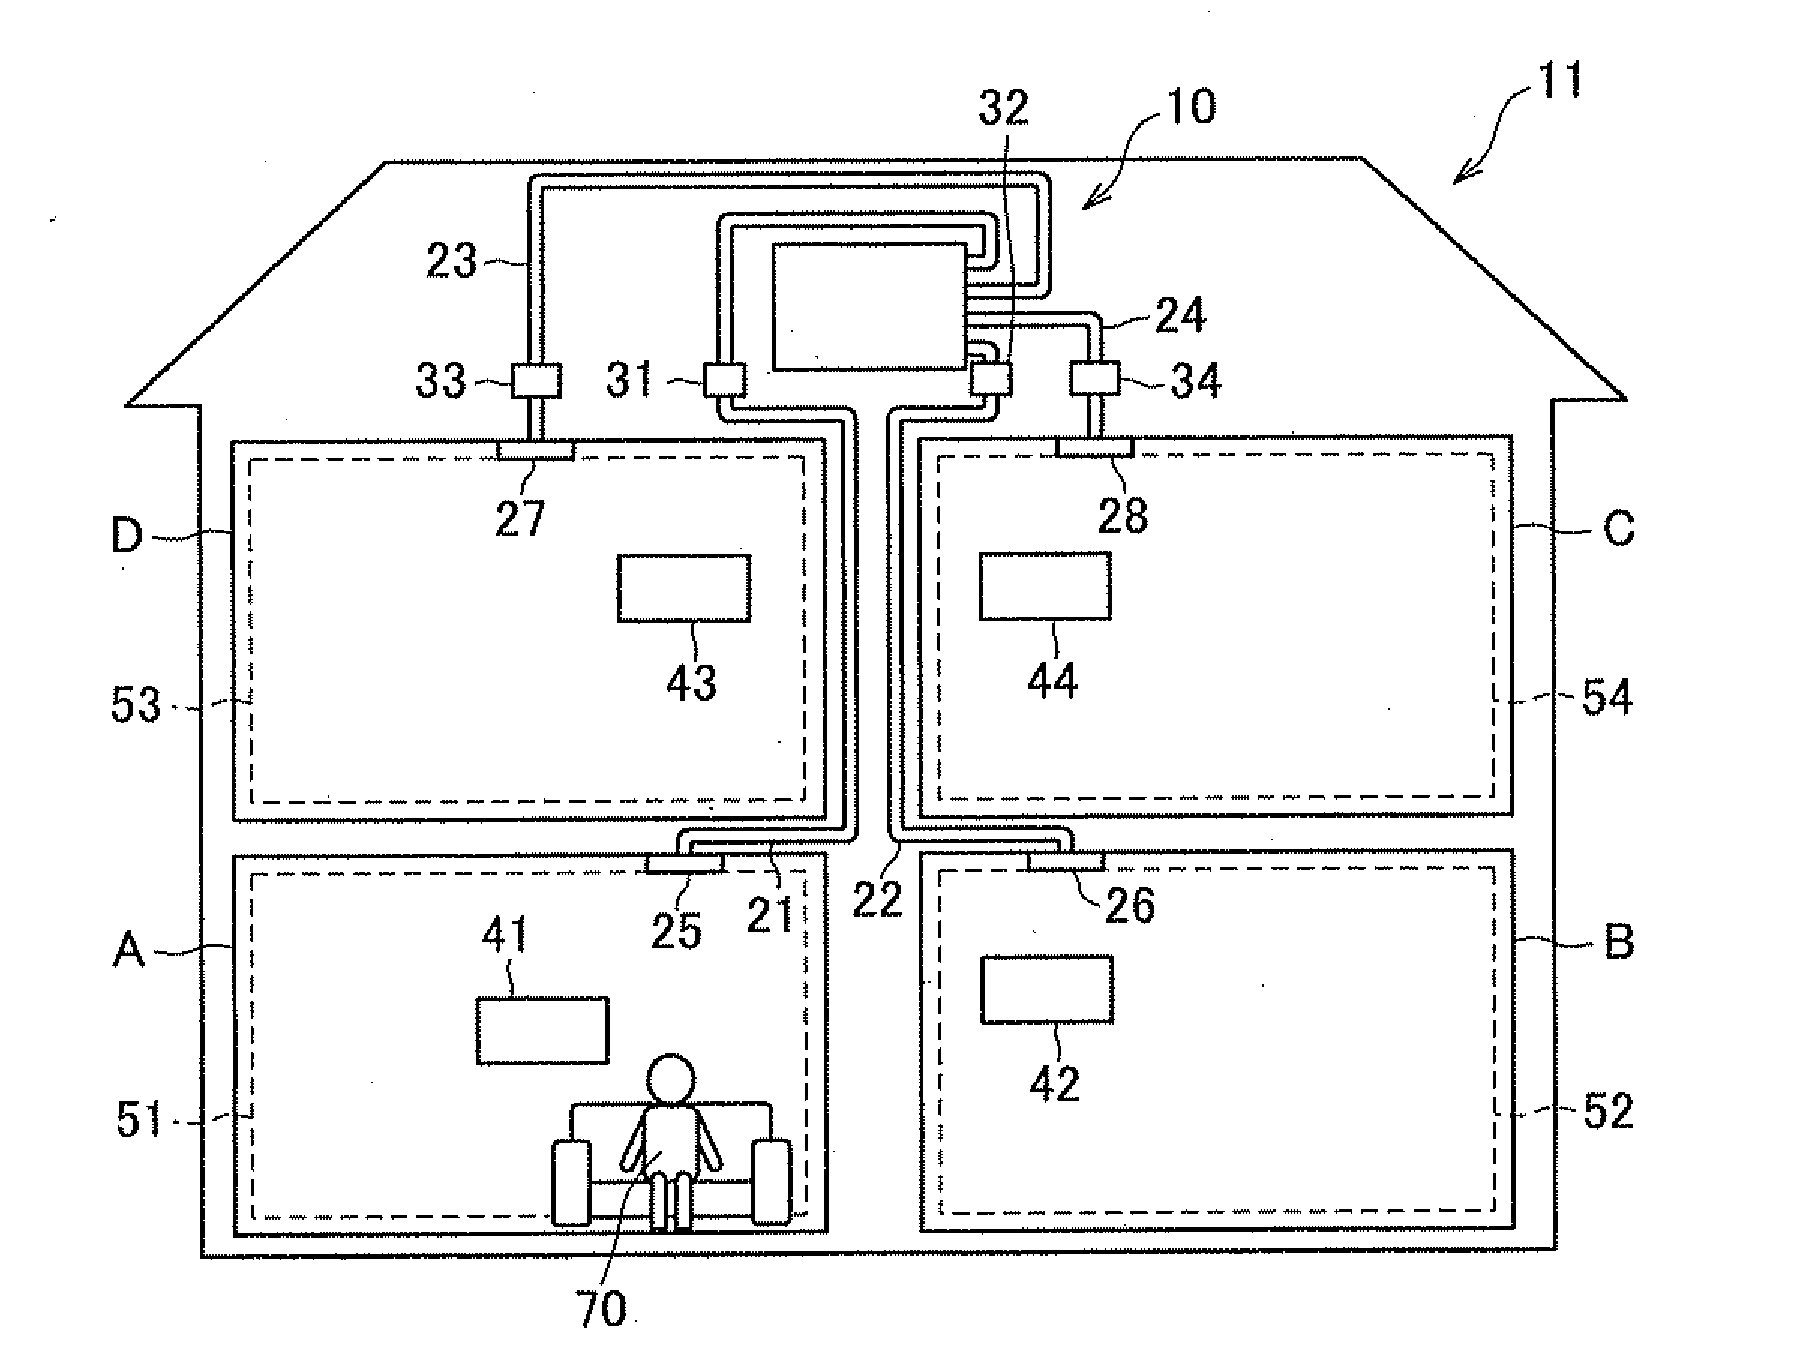 Central air-conditioning system